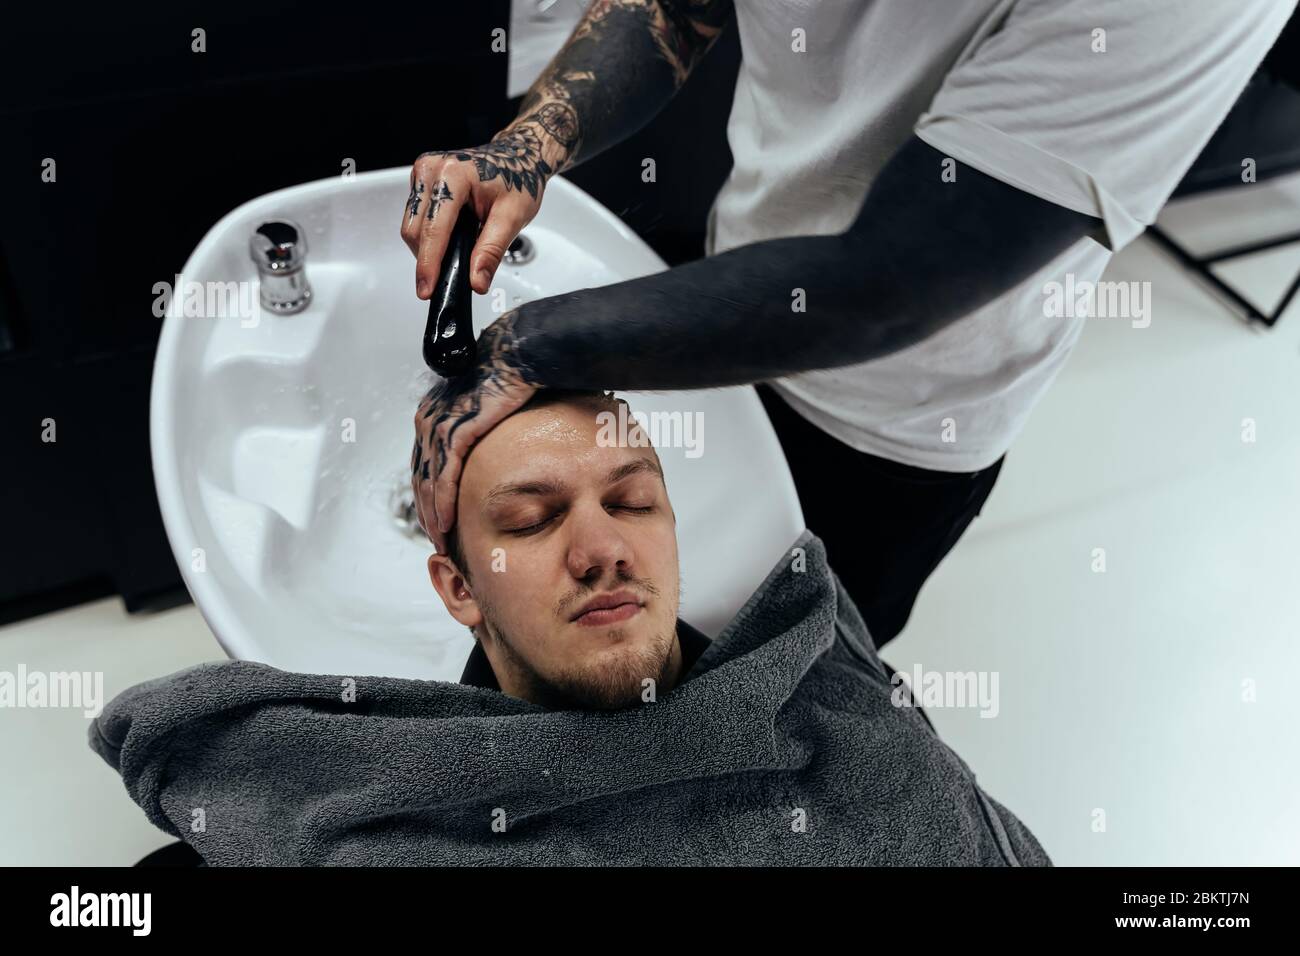 Attractive male is getting a modern haircut in barber shop. Top view of a young man getting his hair washed and his head massaged in a hair salon Stock Photo